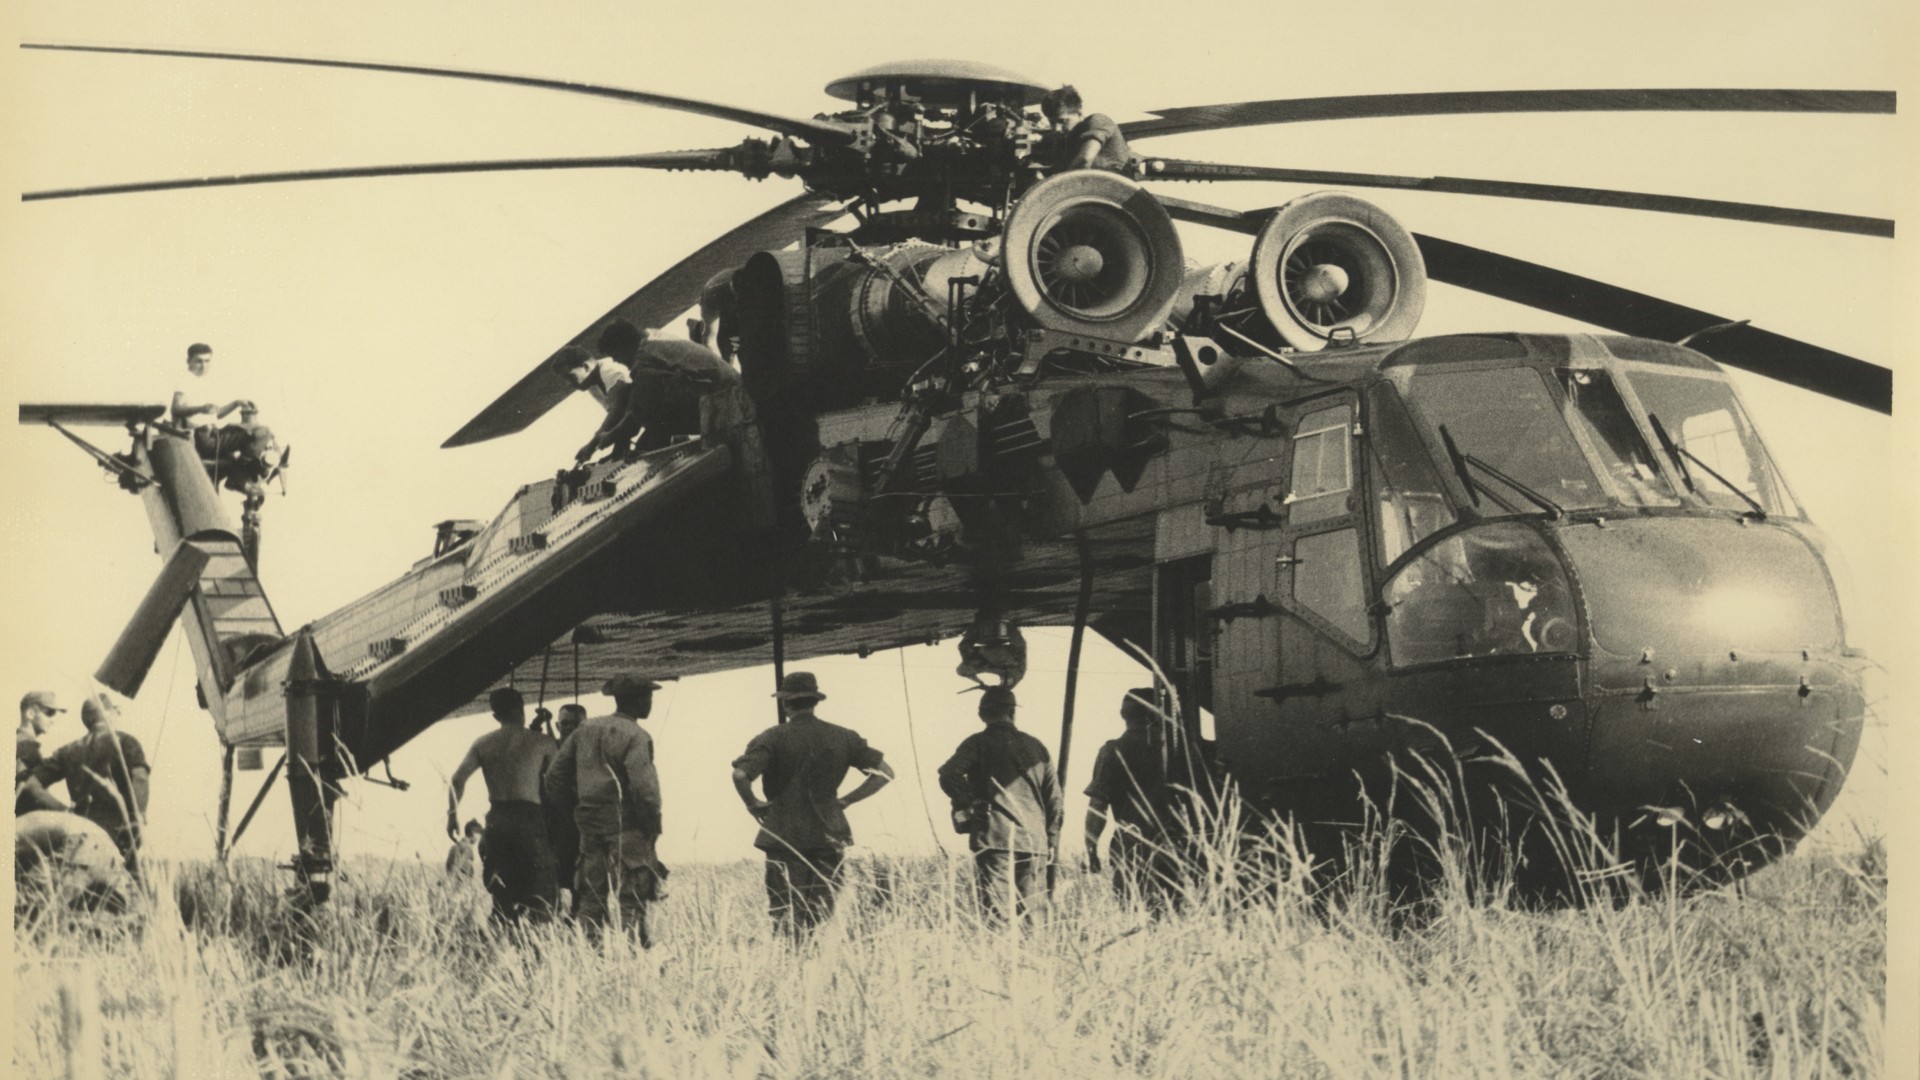 General 1920x1080 military military aircraft helicopters Vietnam War aircraft vintage war military vehicle vehicle Sikorsky CH-54 Tarhe United States Army Sikorsky Aircraft American aircraft